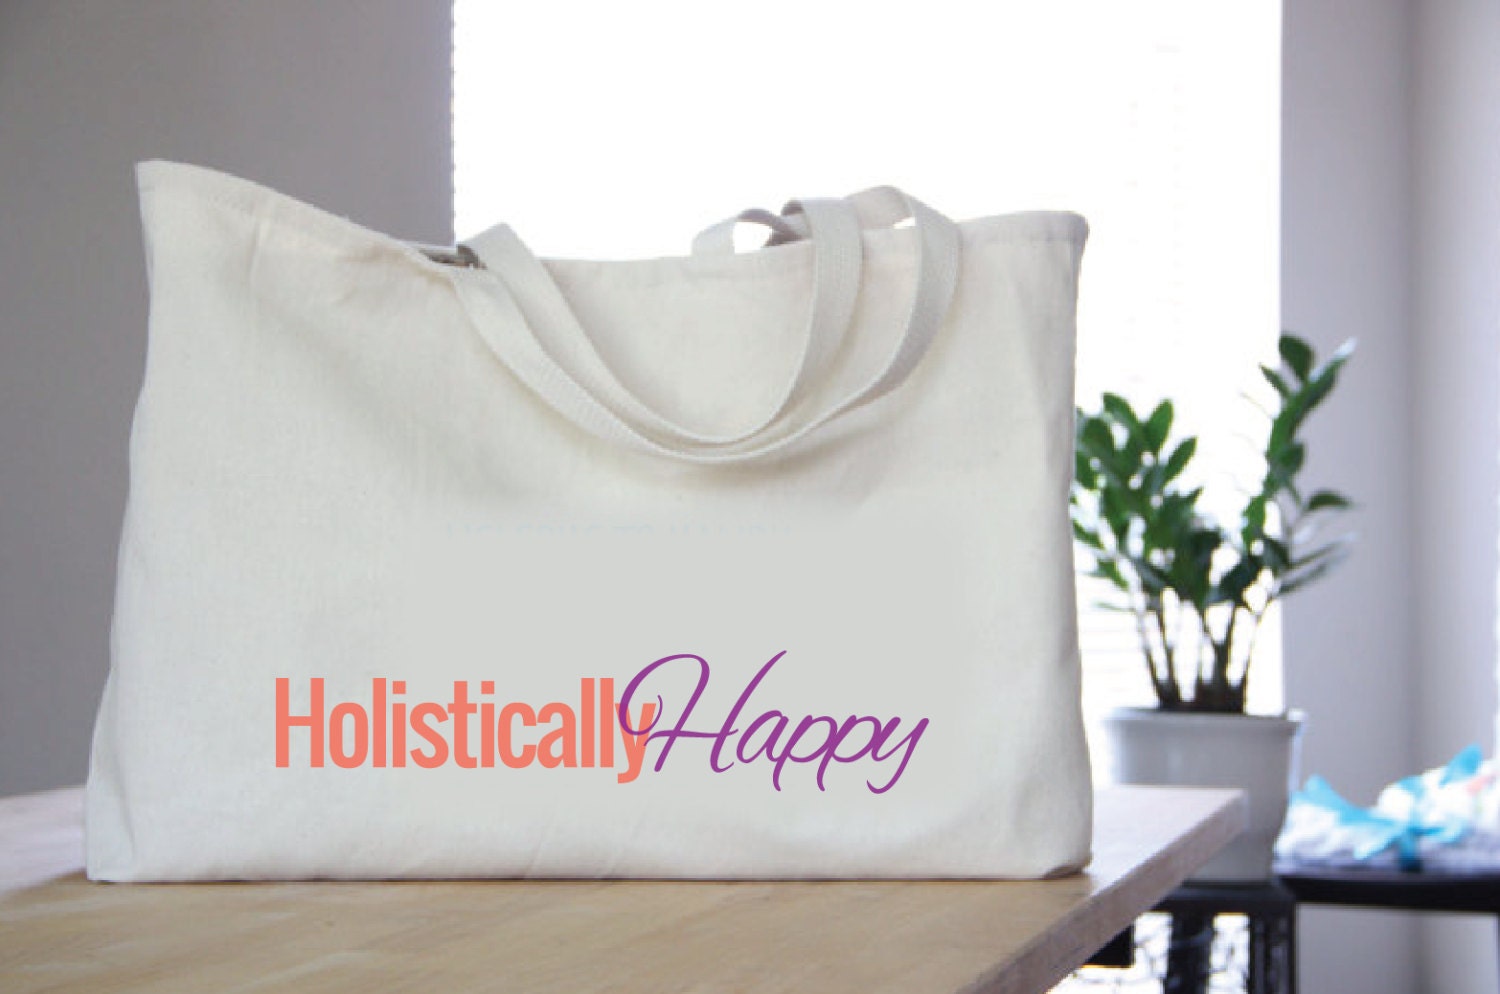 Wedding Welcome Bag / / 20 Custom Totes, Print Included / / Hotel Guests Goody Bag for Destination Weddings / / Oversize Beach Tote